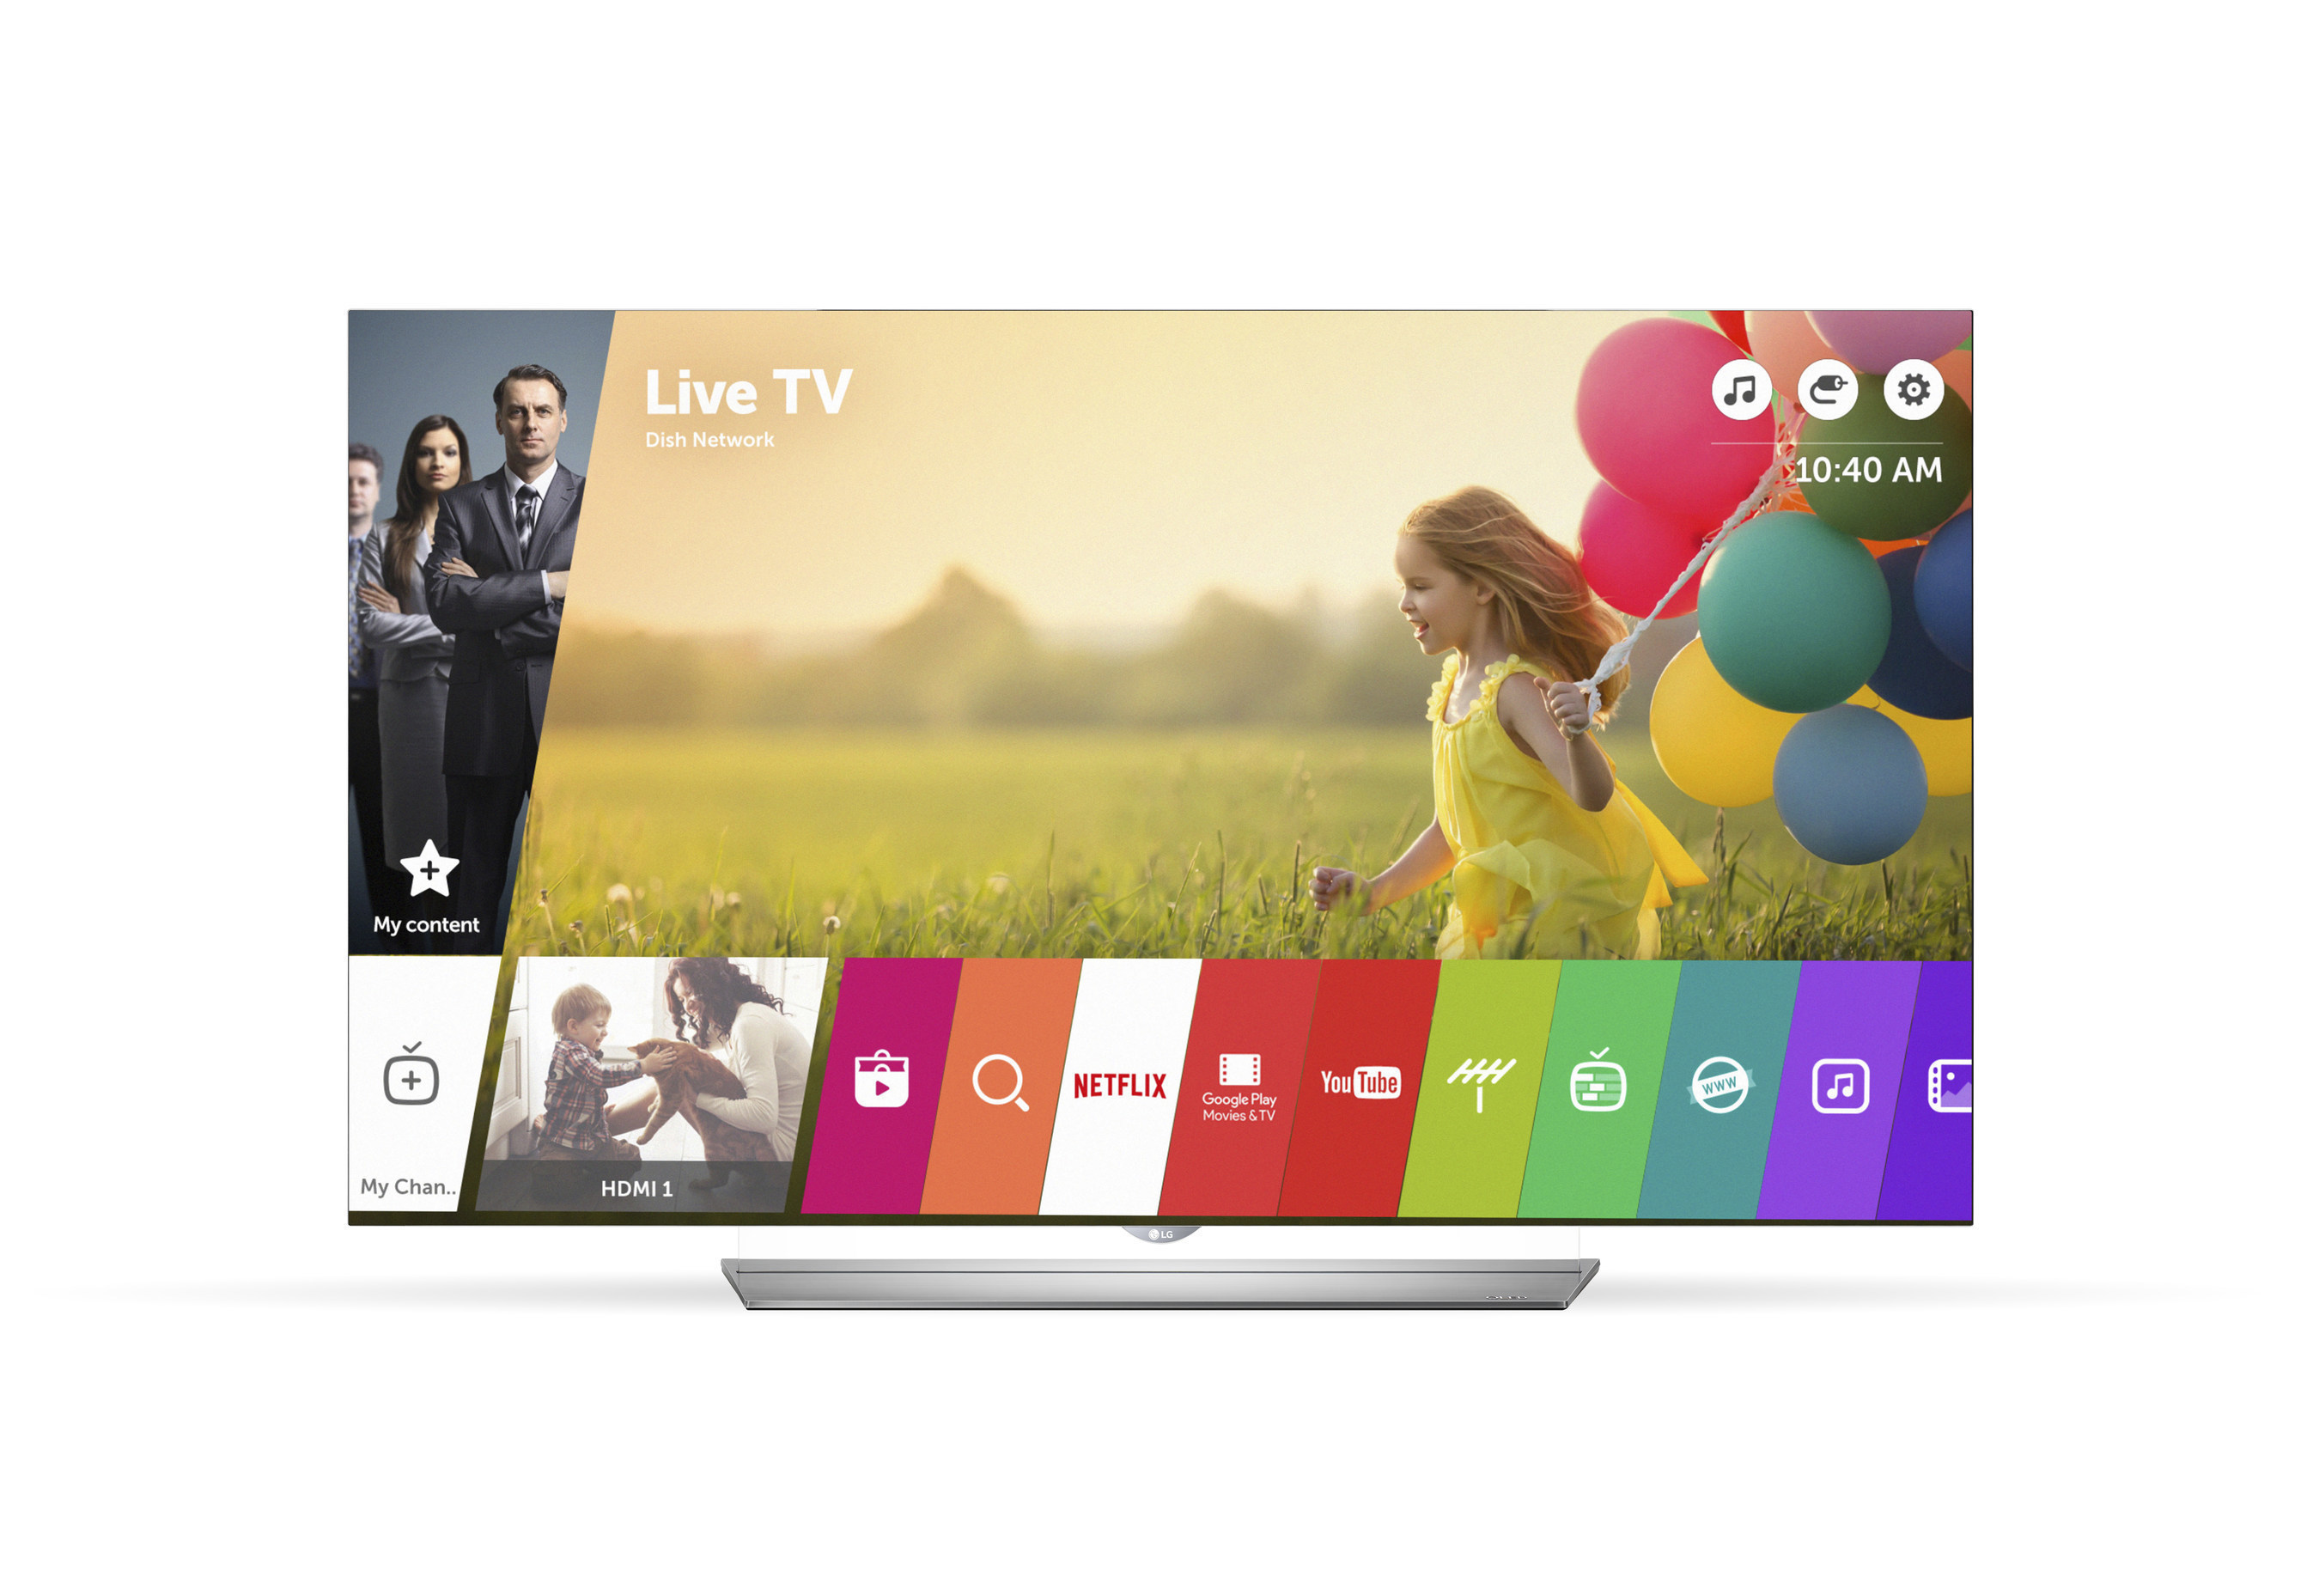 LG will unveil its updated webOS 3.0 Smart TV platform with new advanced features at CES(R) 2016.